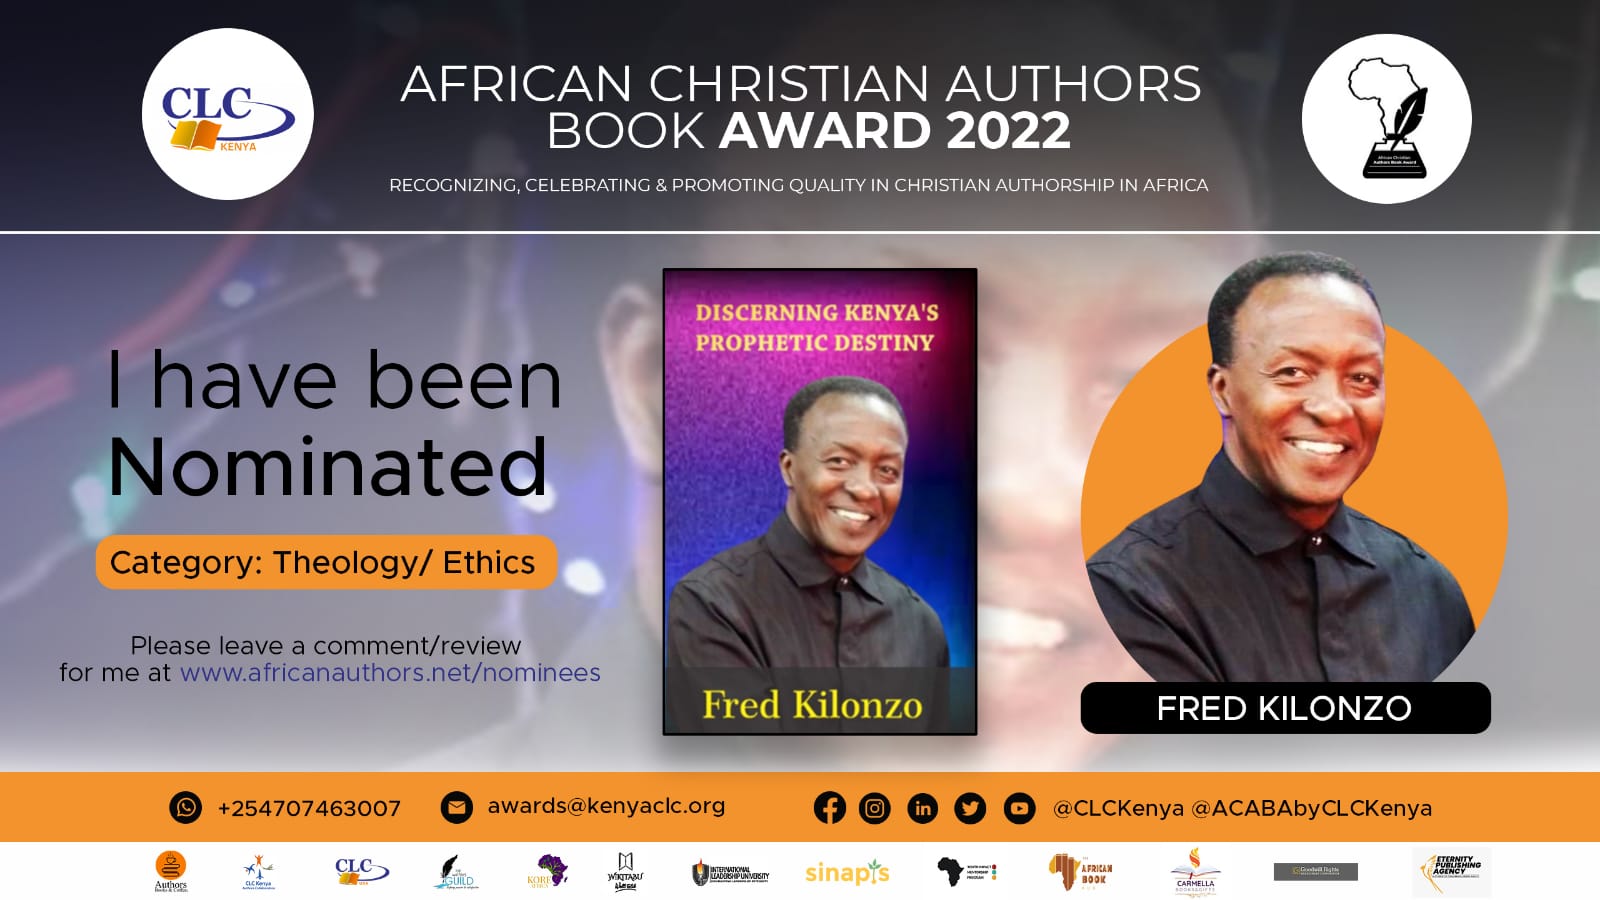 Fred Kilonzo’s Book Was Born Out Of God’s Move In Kenya